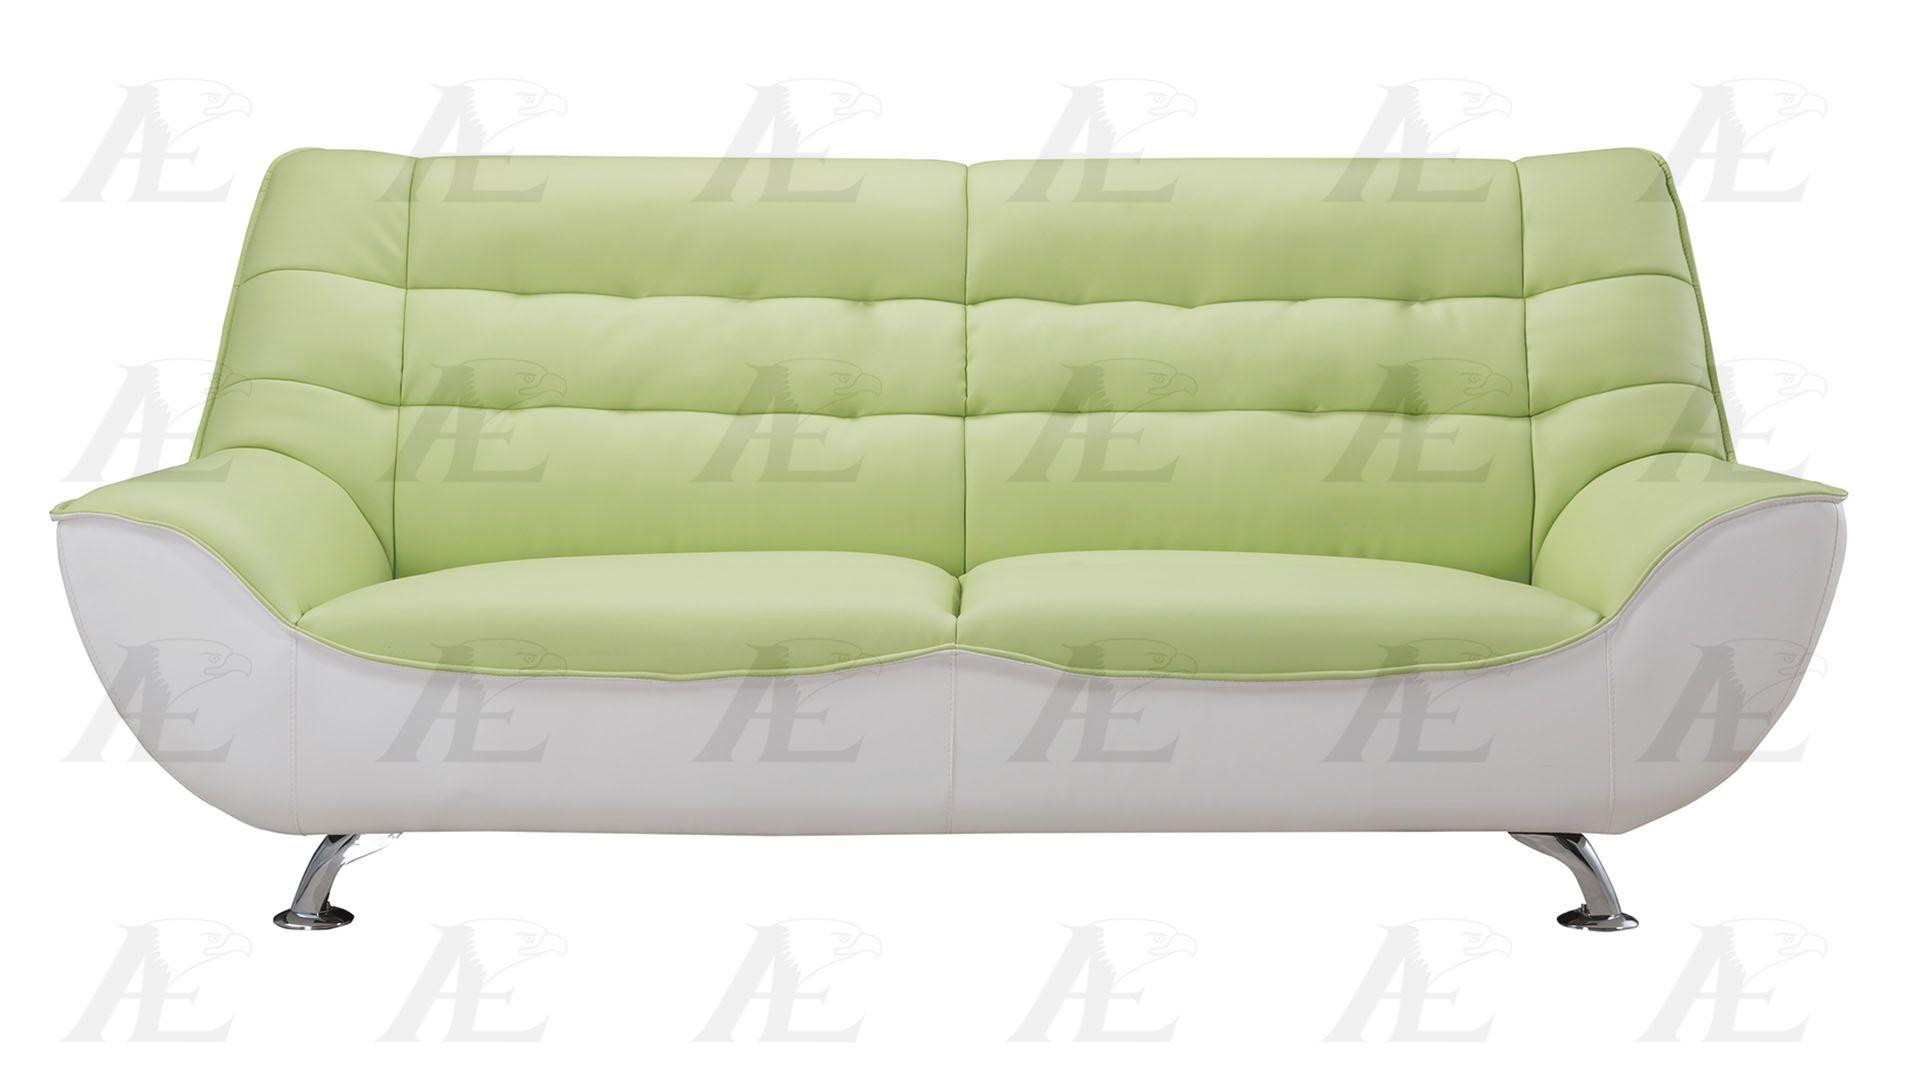 

    
American Eagle Furniture  AE612-GN.W Green and White Sofa Loveseat Set Bonded Leather Modern 2Pcs
